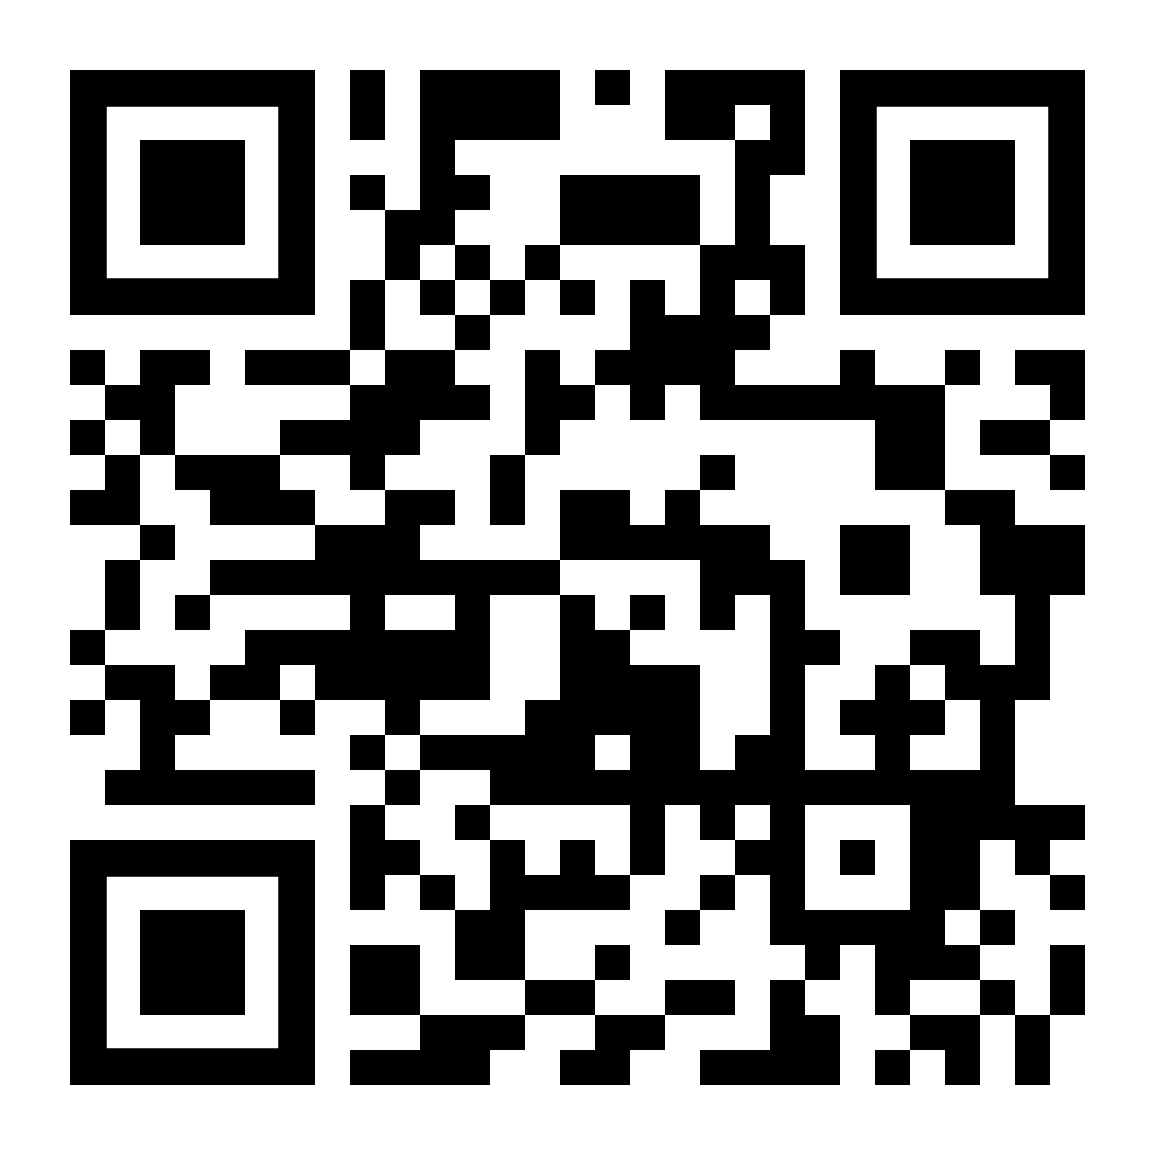 Pay by QR Code